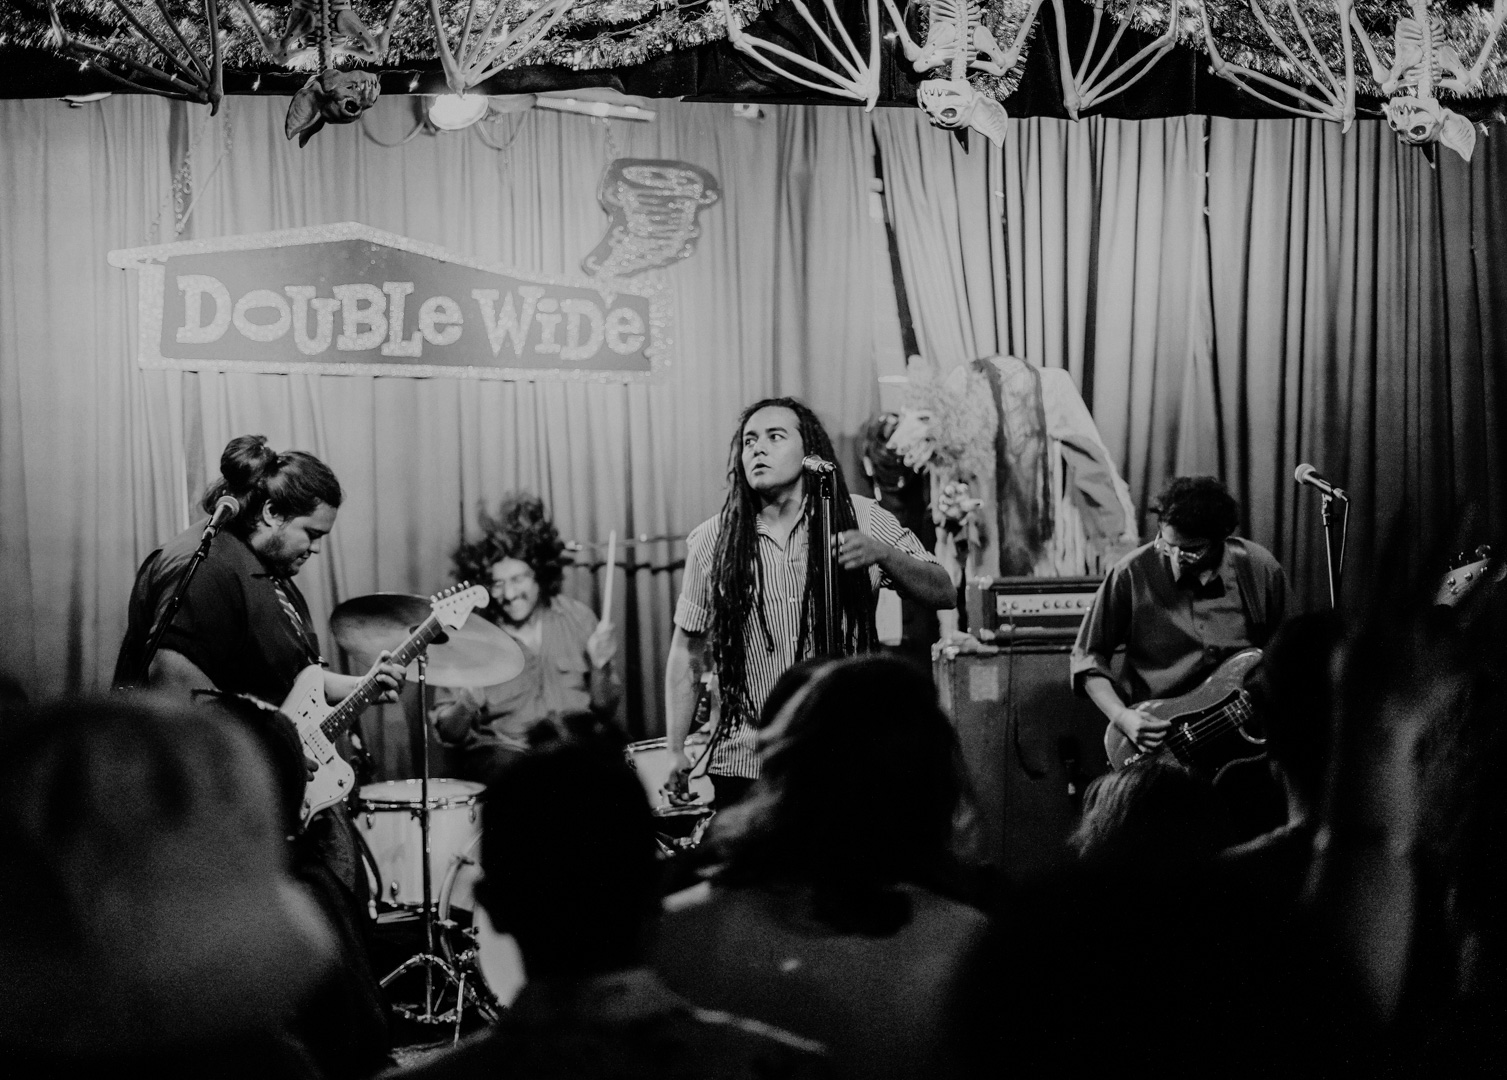 A full band on stage, black and white photo